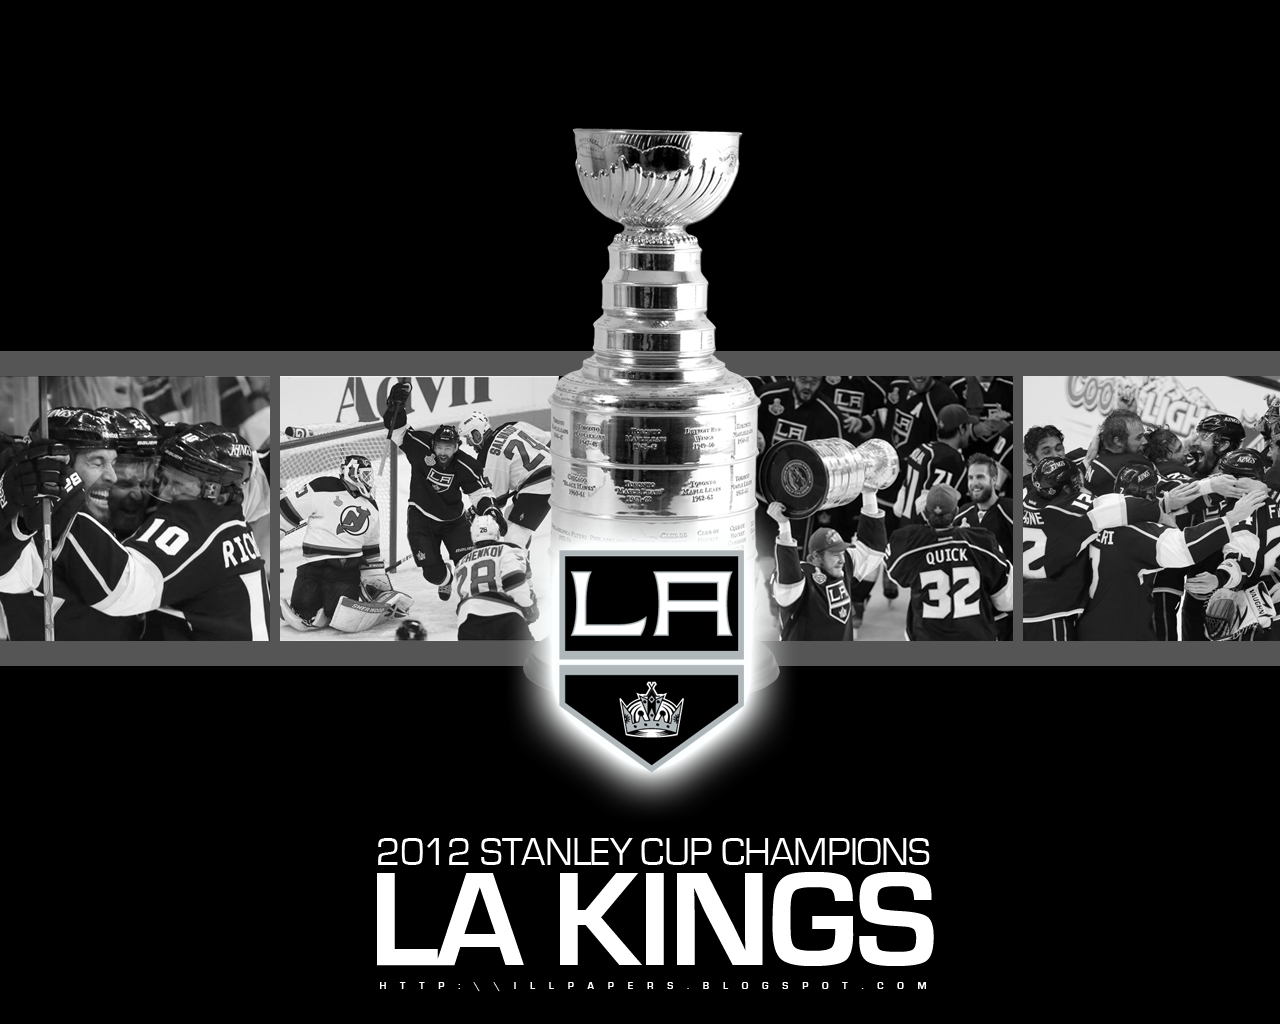  Wallpapers Backgrounds More 2012 Stanley Cup Champions LA Kings